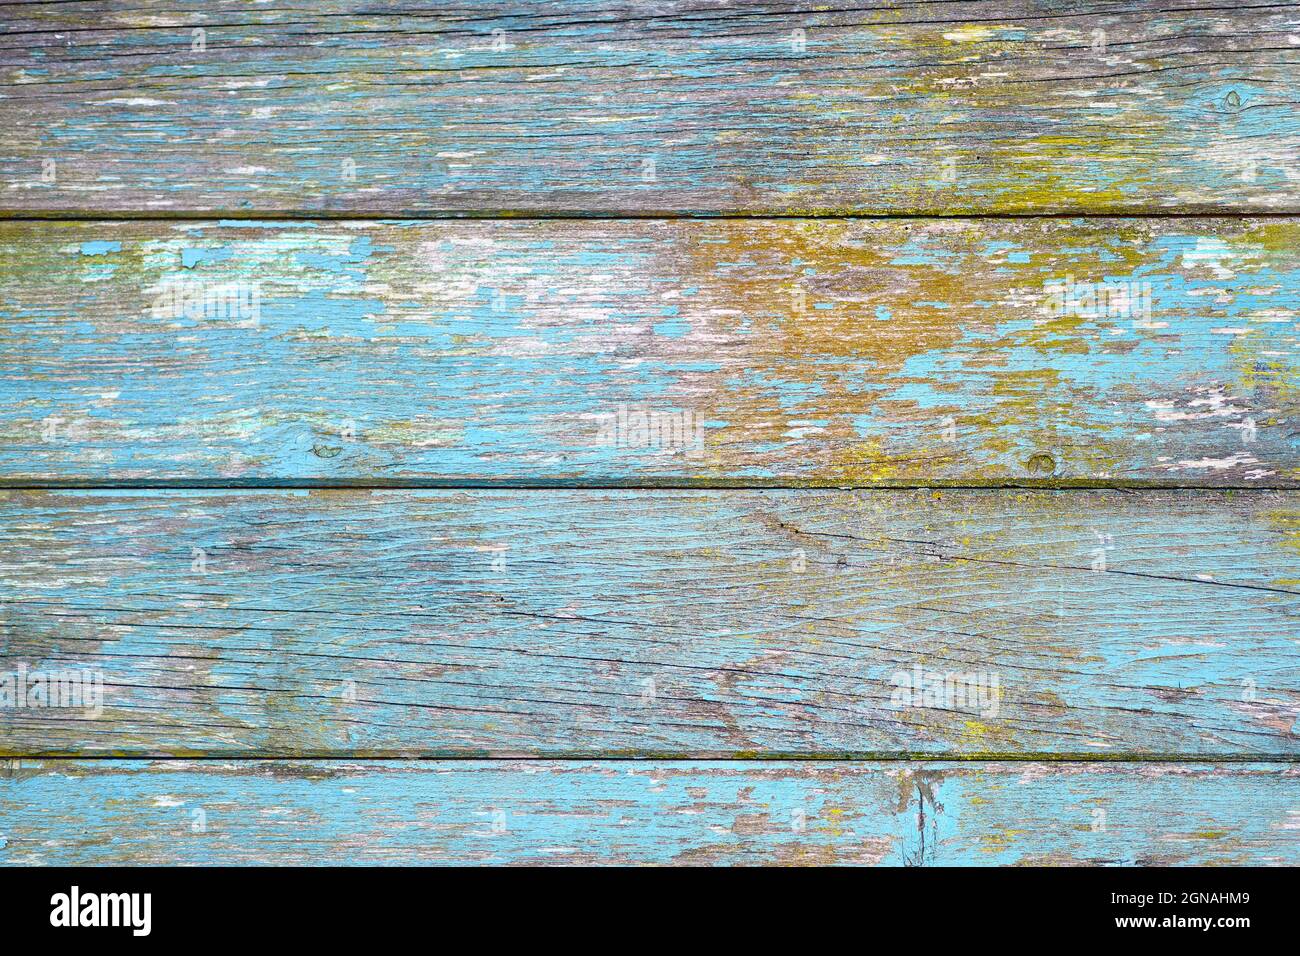 Horizontal wooden planks background with teal blue and yellow colored old weathered planks with chipped paint Stock Photo